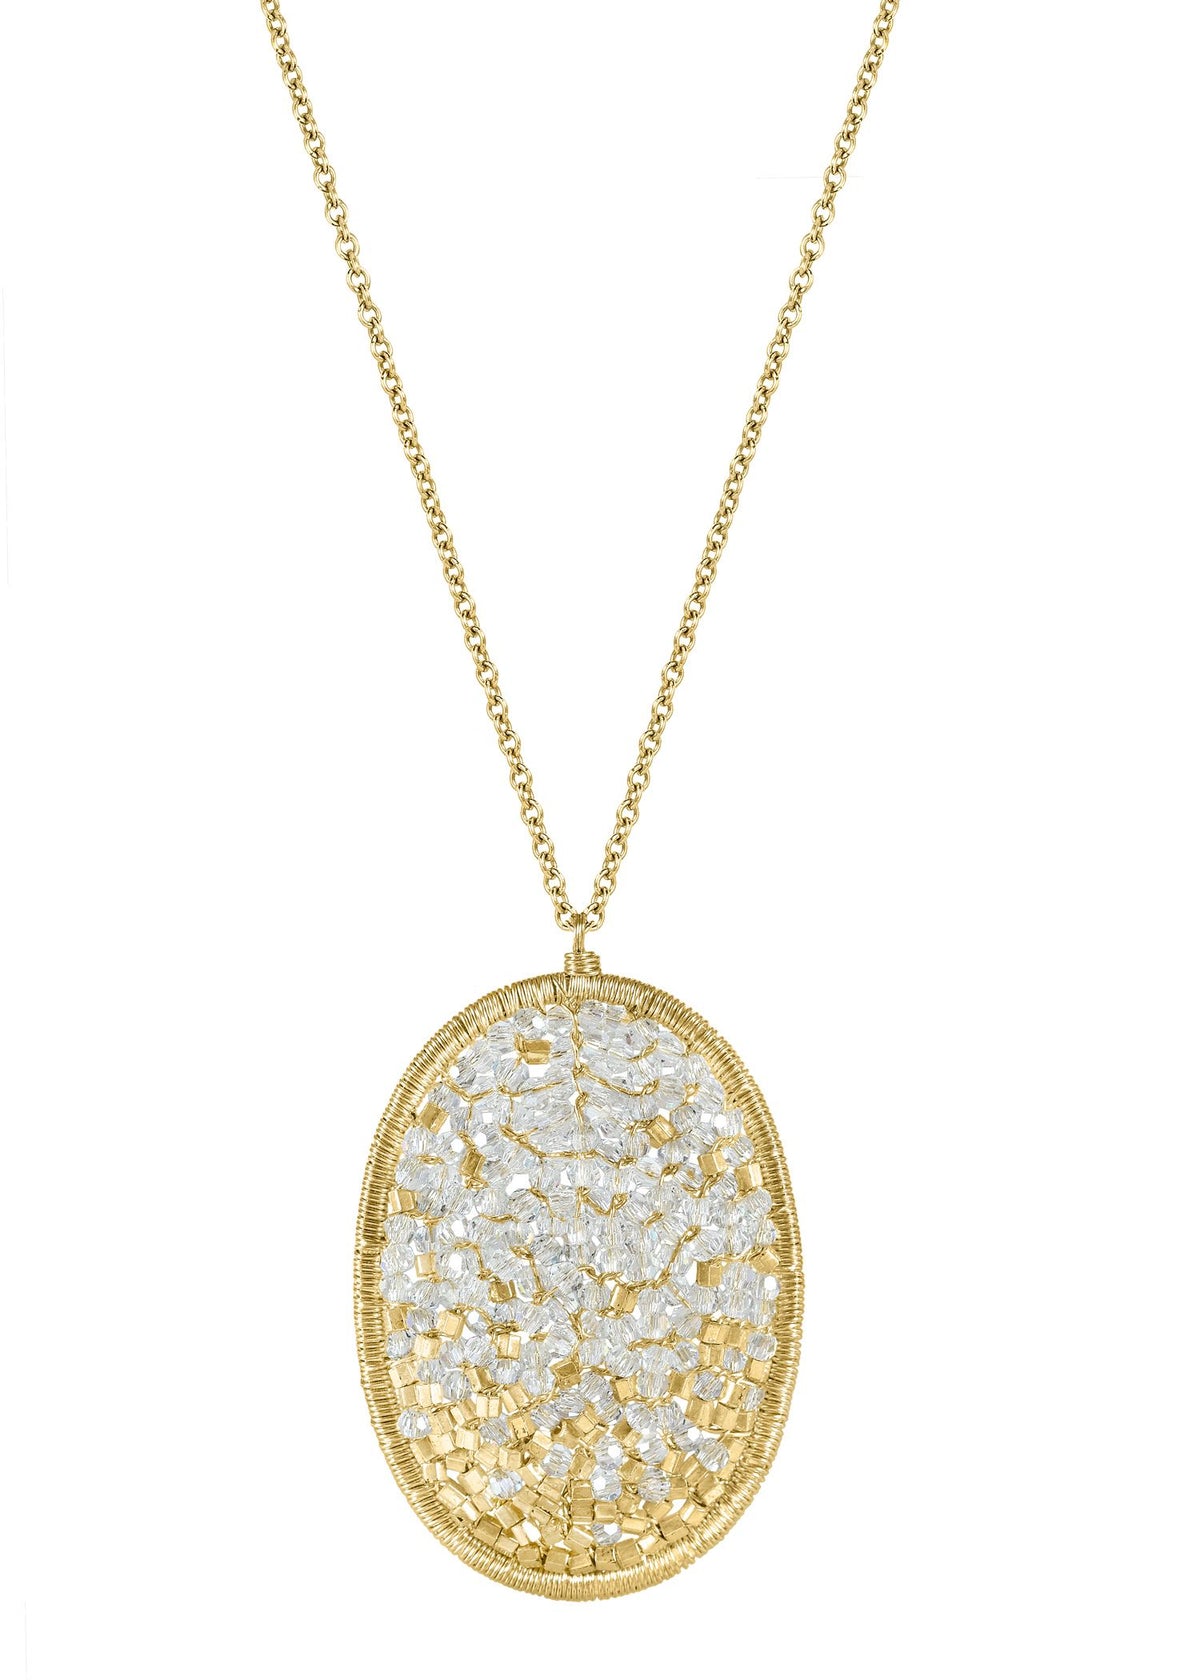 Crystal 14k gold fill Necklace measures 17&quot; in length Pendant measures 1-1/2&quot; in length and 1&quot; in width Handmade in our Los Angeles studio